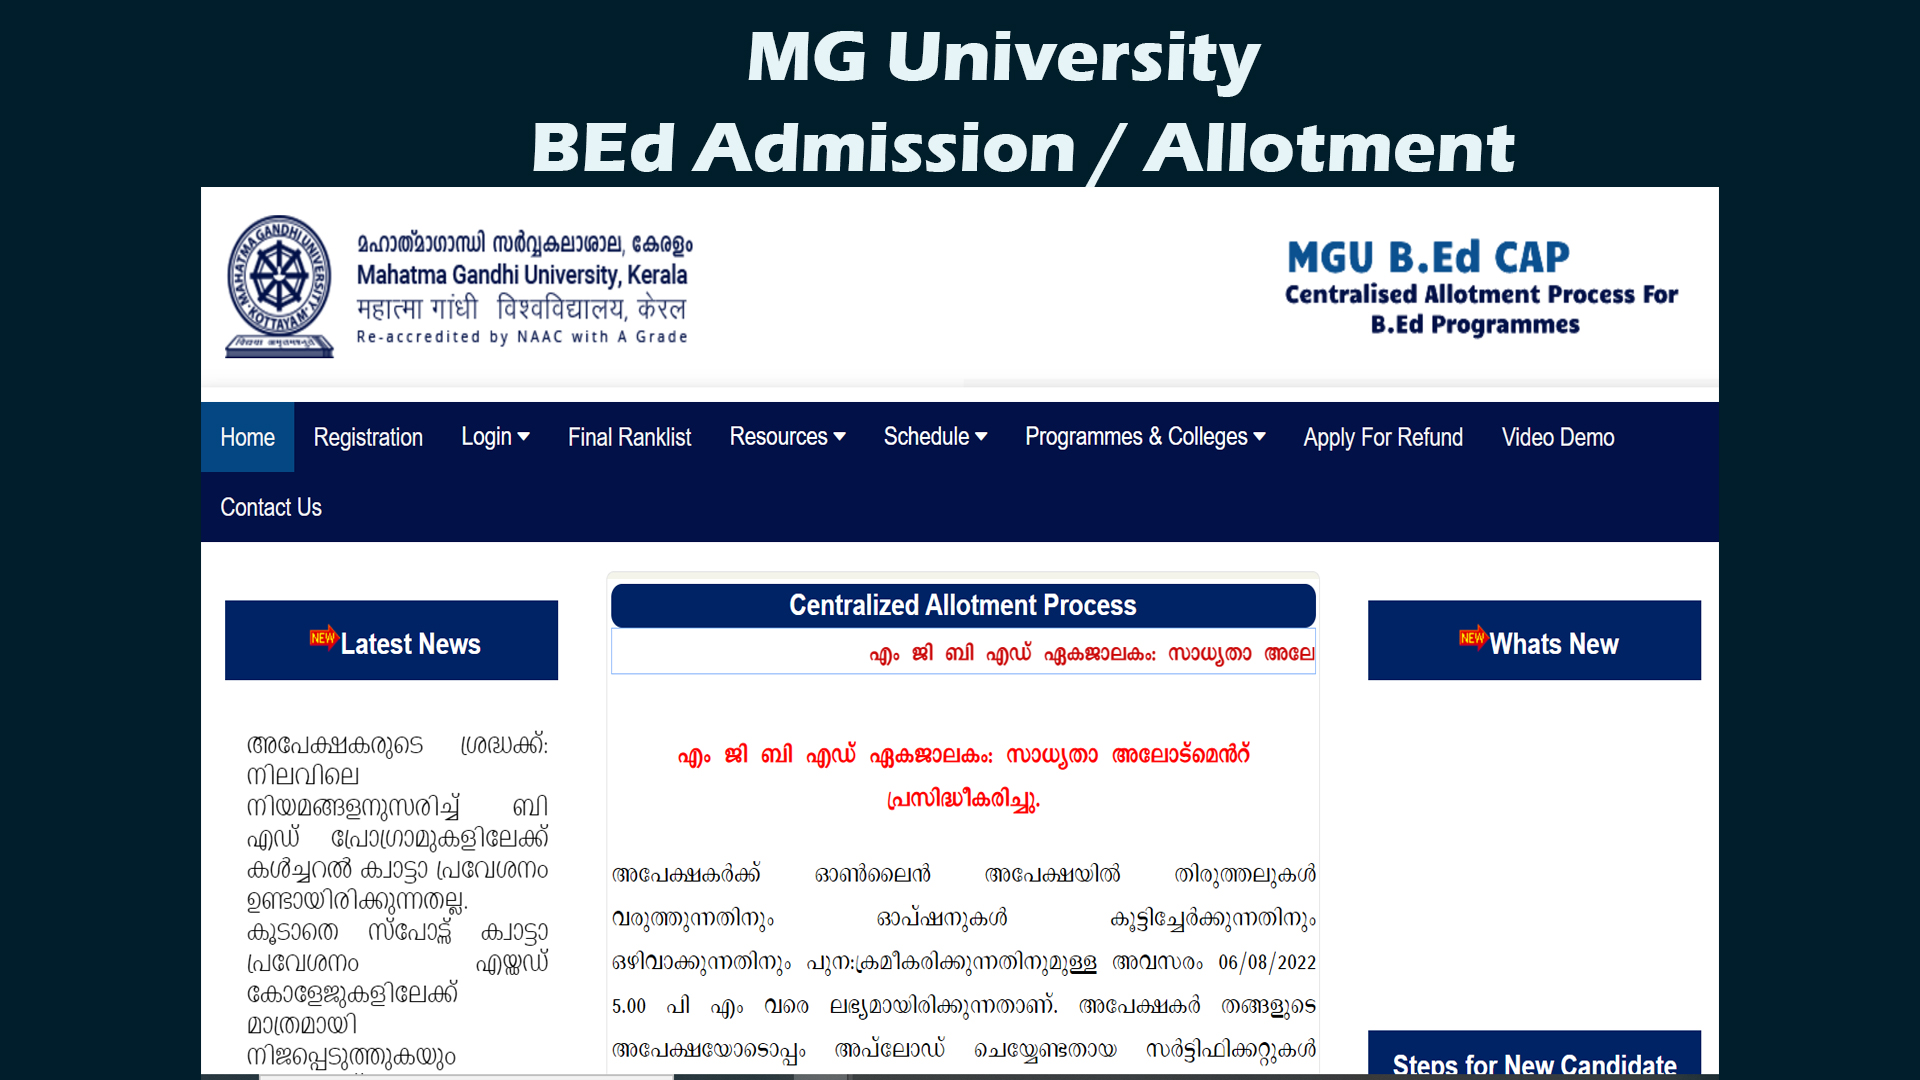 MG University BEd Admission / Allotment